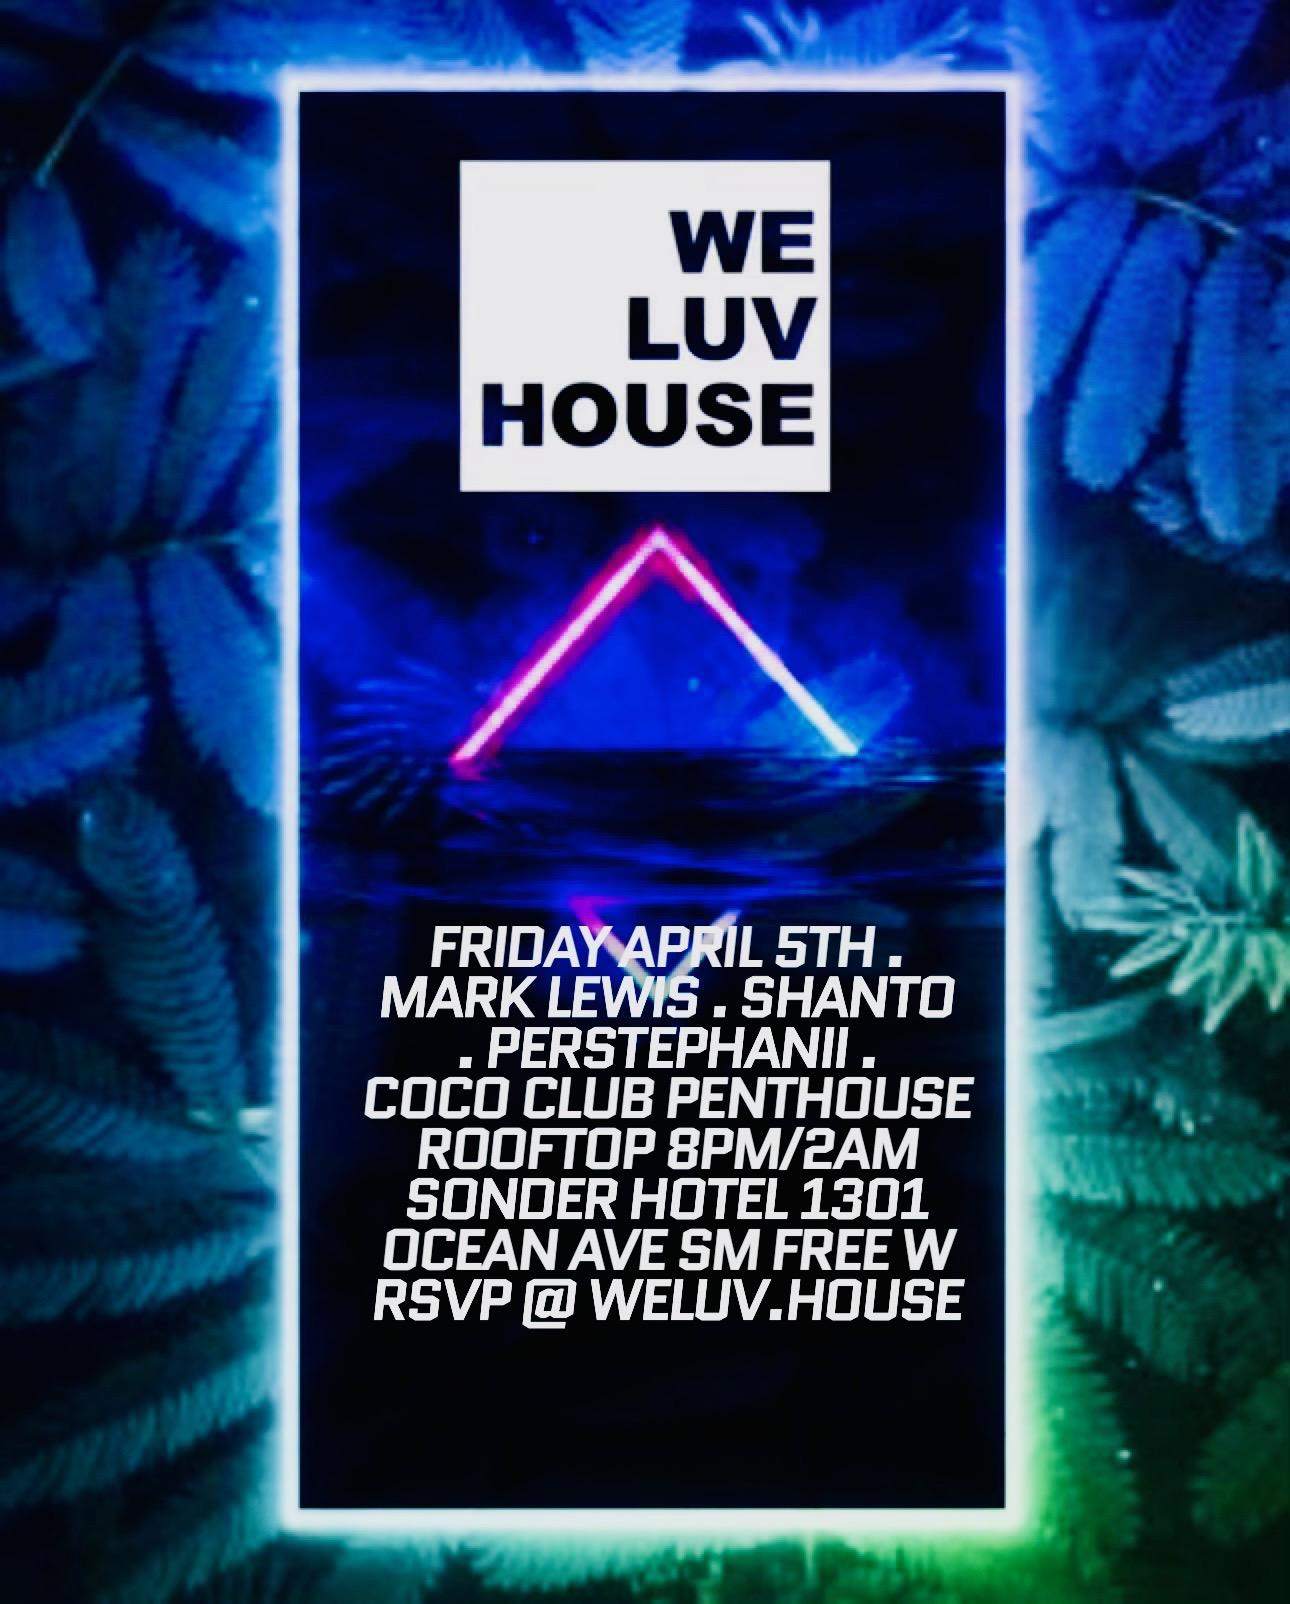 We Luv House at The Coco Club Rooftop - フライヤー表